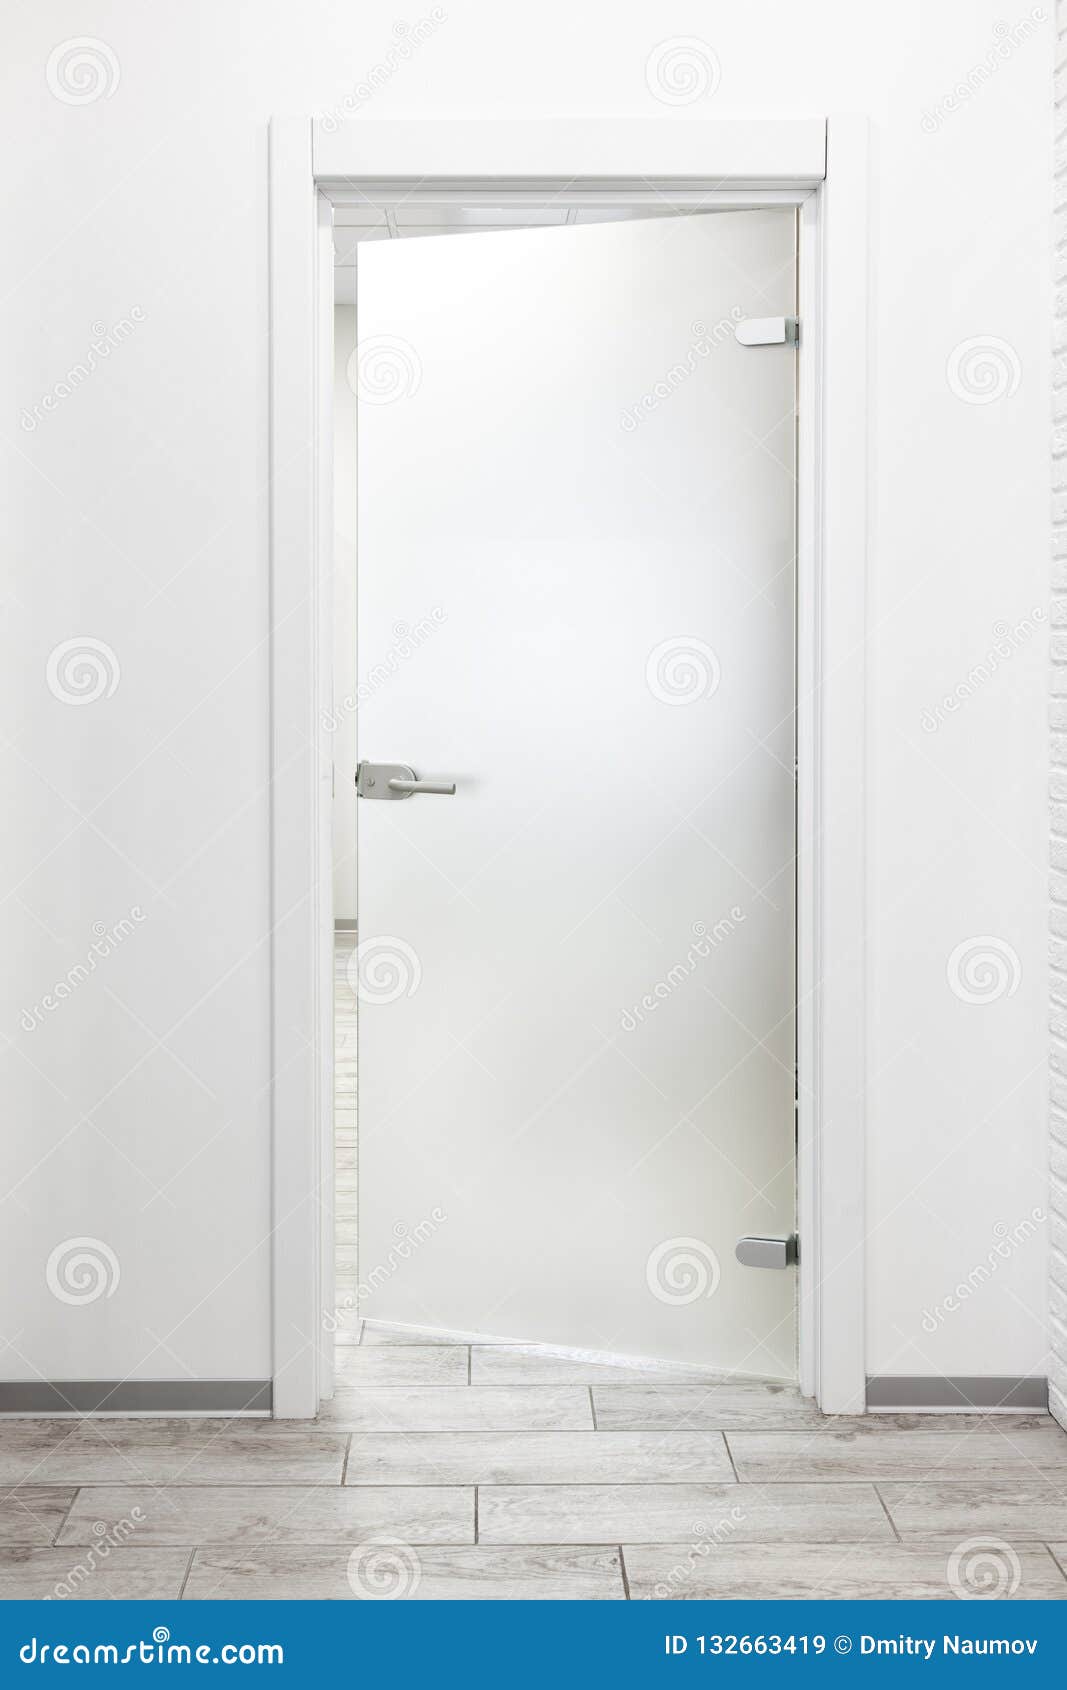 Minimalist White Office Interior with Frosted Glass Door Ajar Stock Image -  Image of door, bright: 132663419